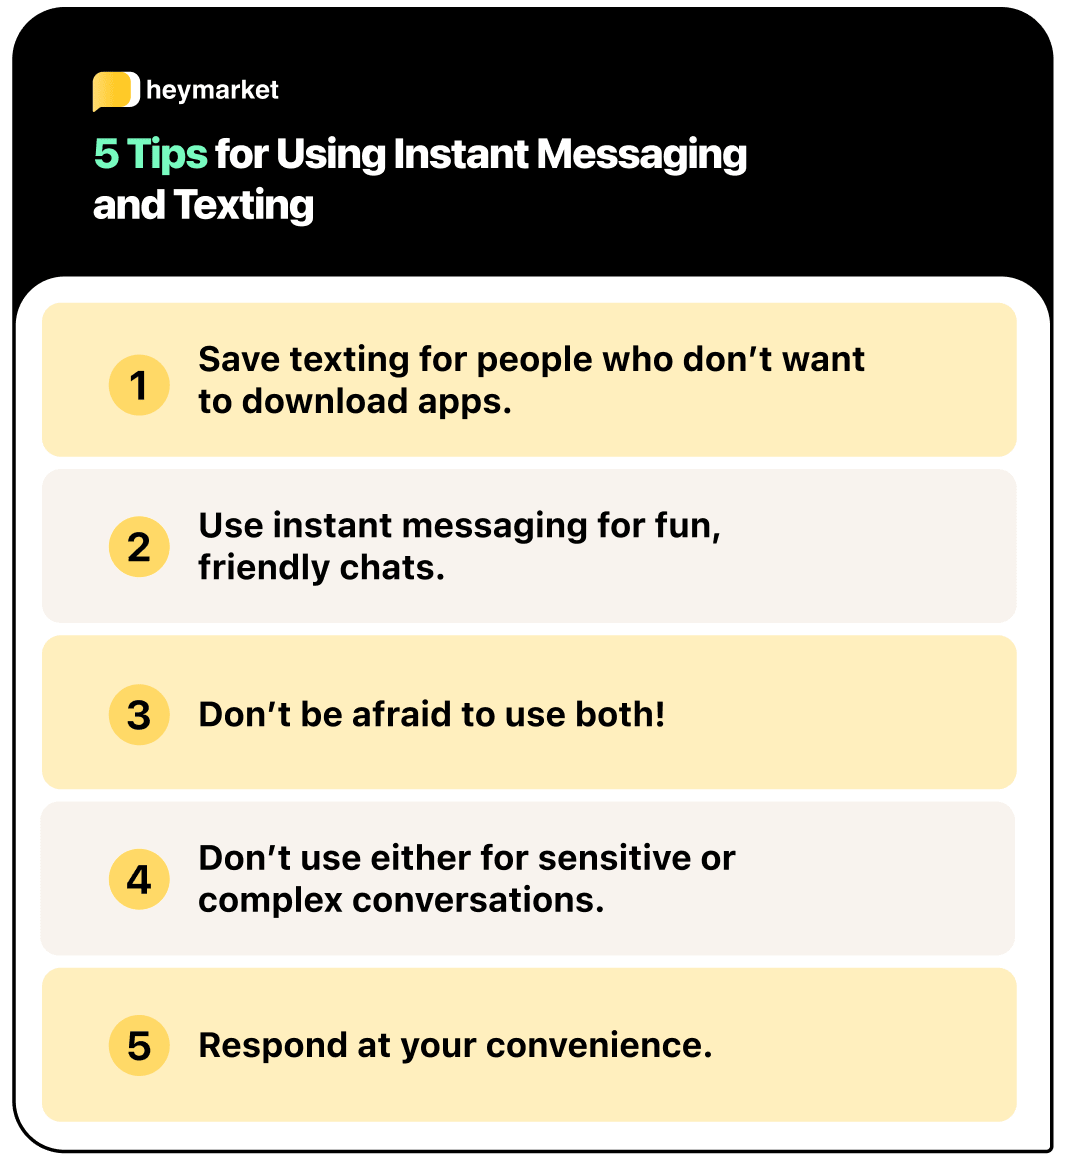 Tips for using instant messaging and texting